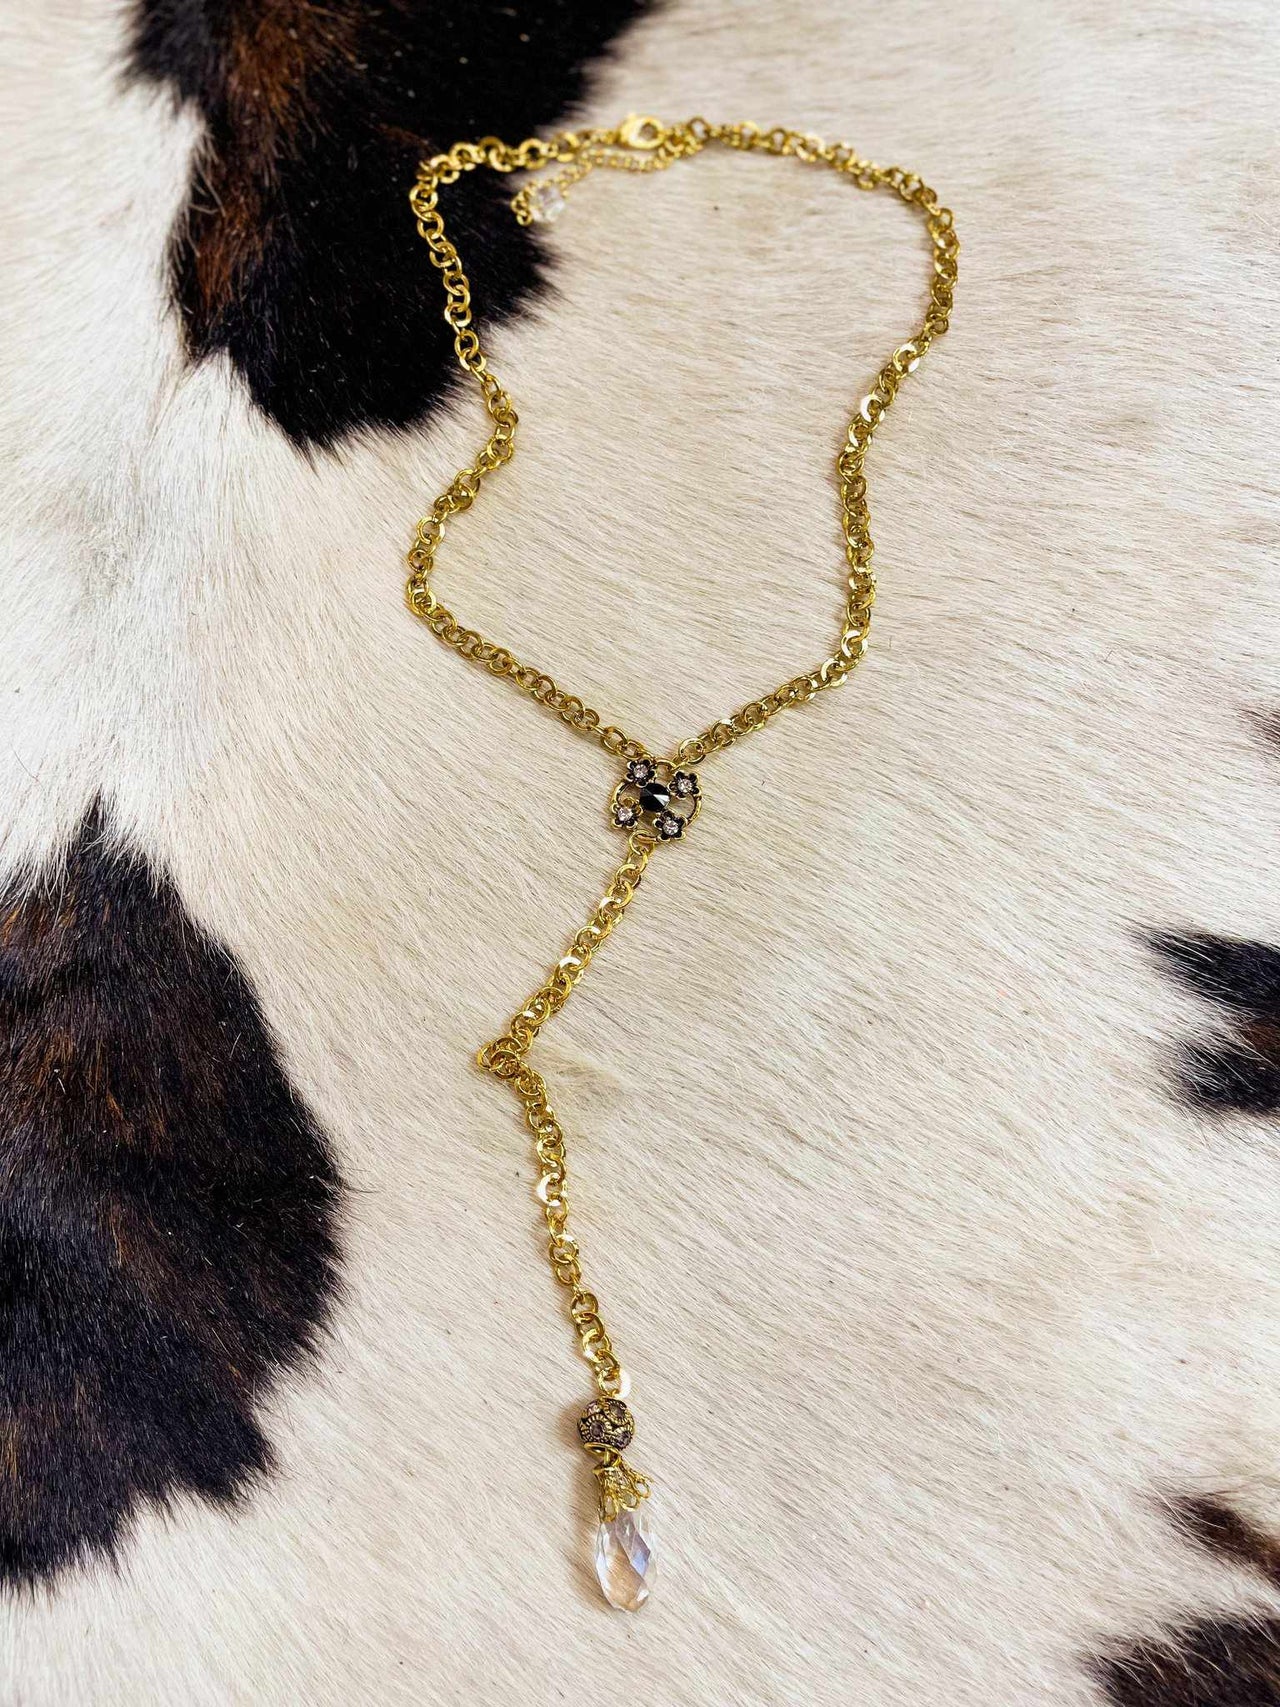 The Nova Antique Gold Necklace-Necklaces-Southern Fried Chics